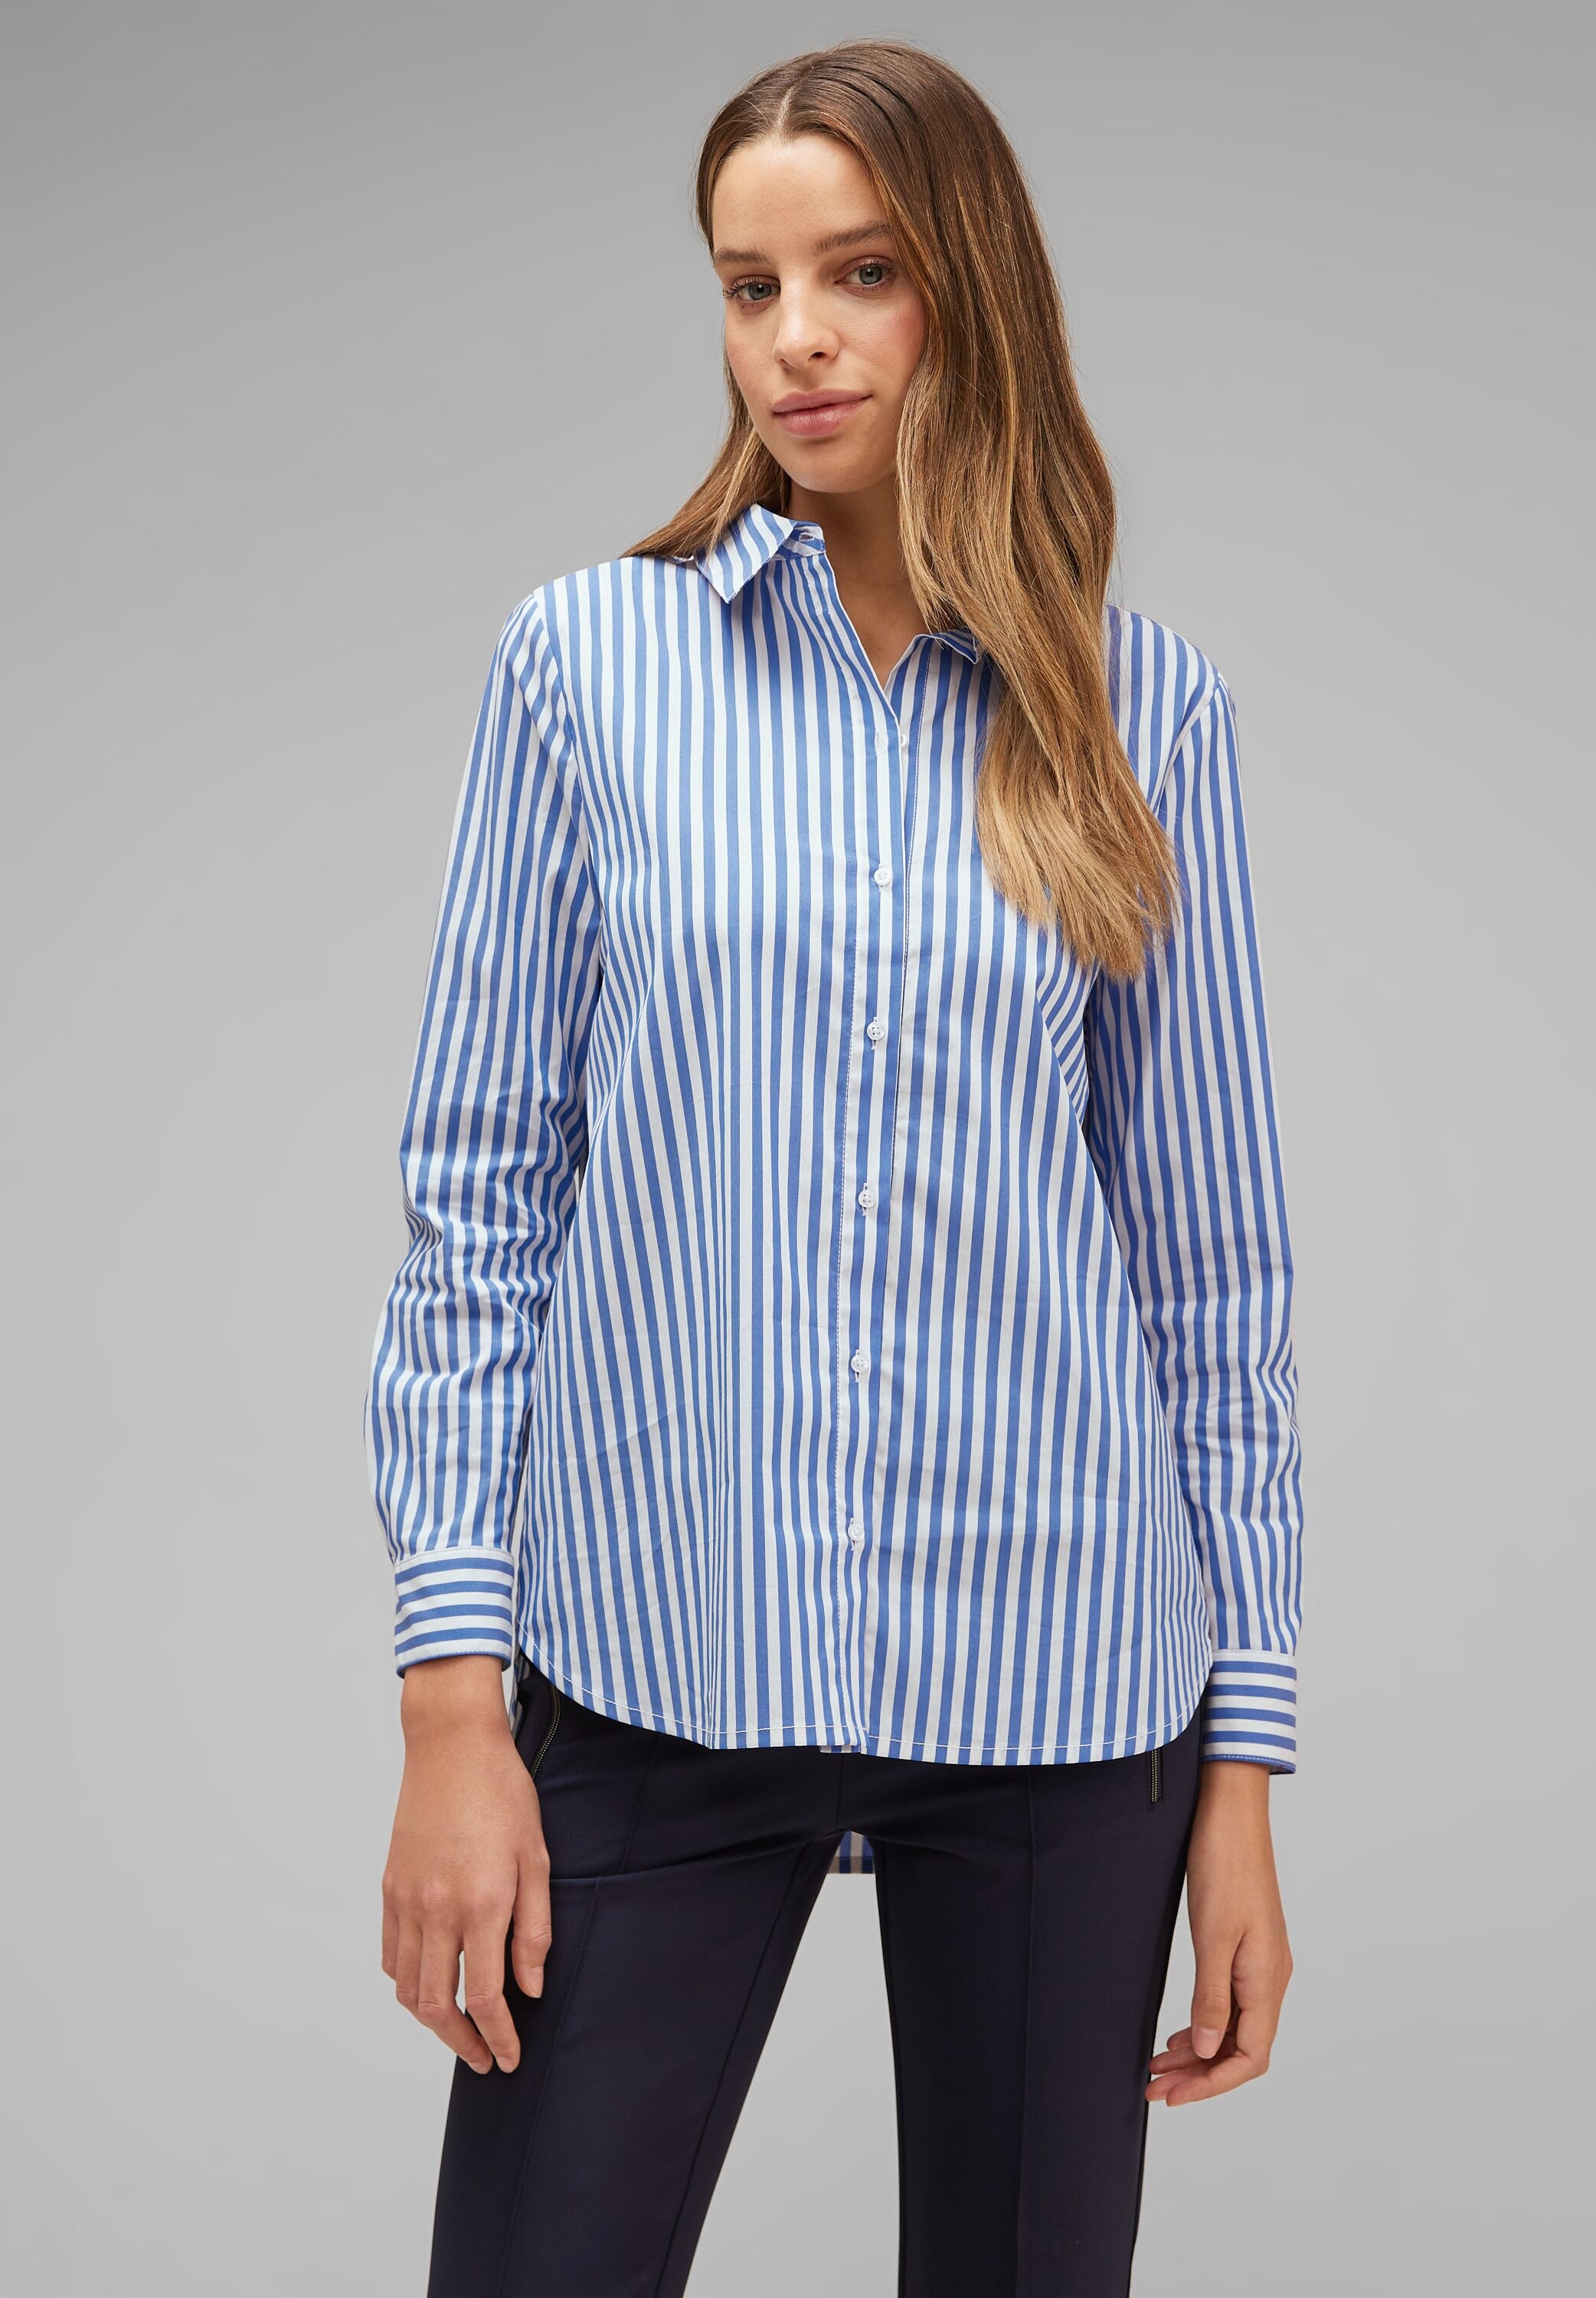 STREET »Striped Blouse«, mit ONE Streifenmuster Longbluse bei ♕ Office